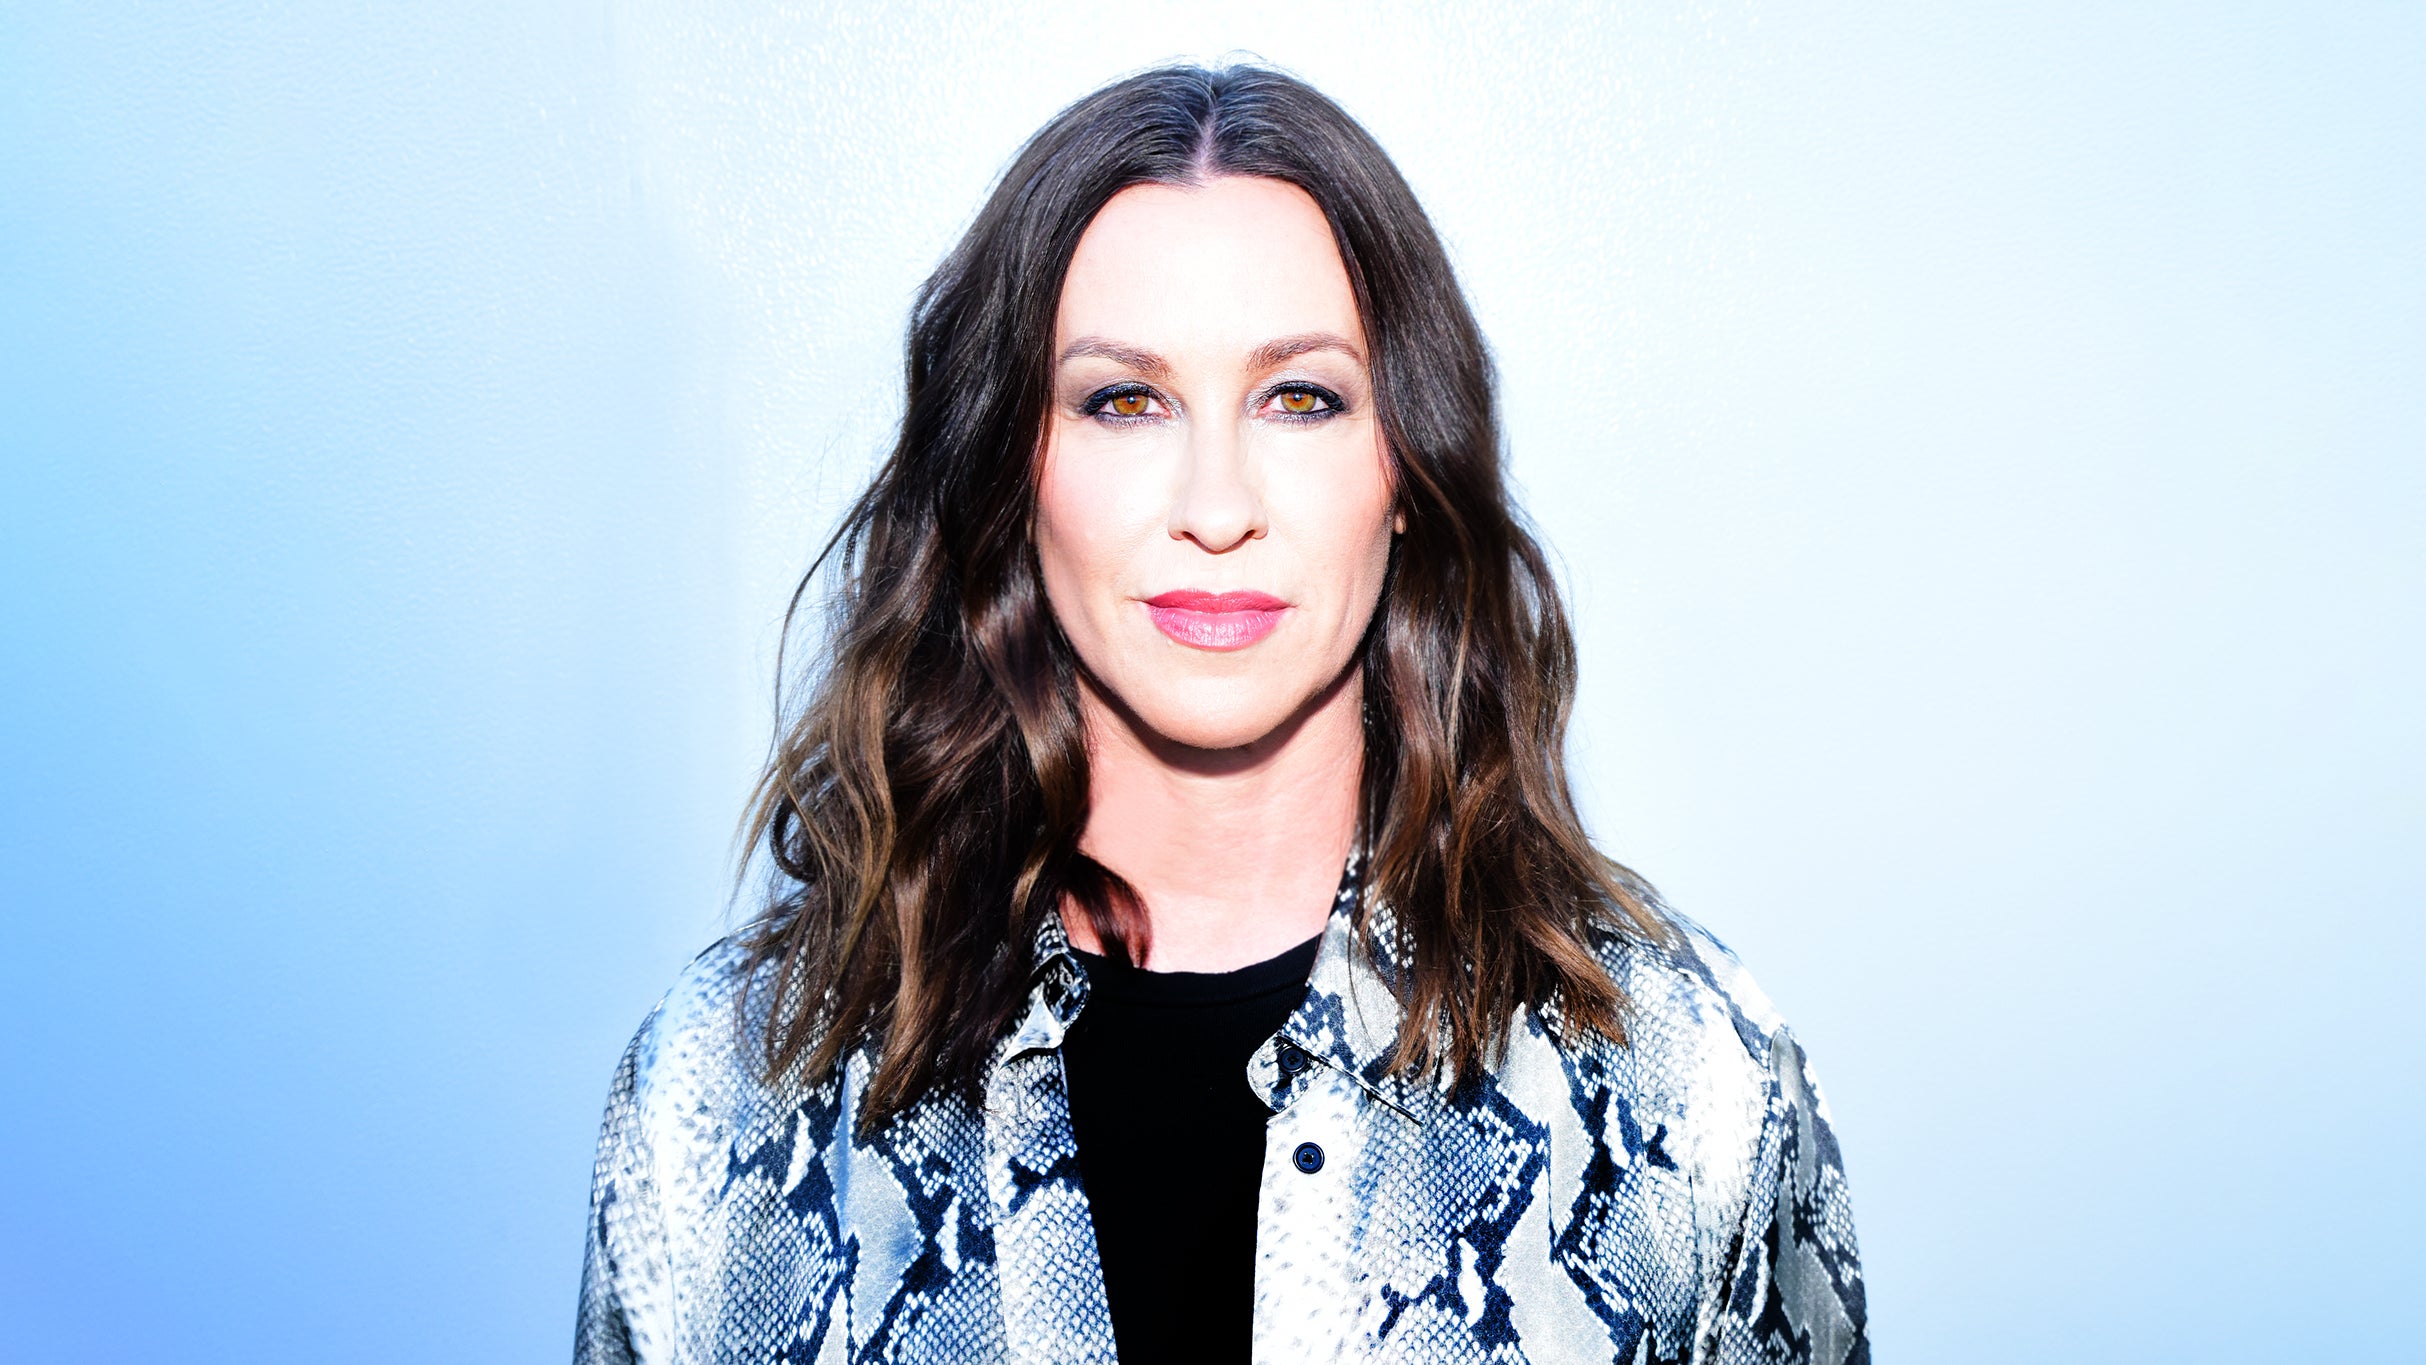 presale password for Alanis Morissette - The Triple Moon Tour tickets in Maryland Heights - MO (Hollywood Casino Amphitheatre - St. Louis, MO)